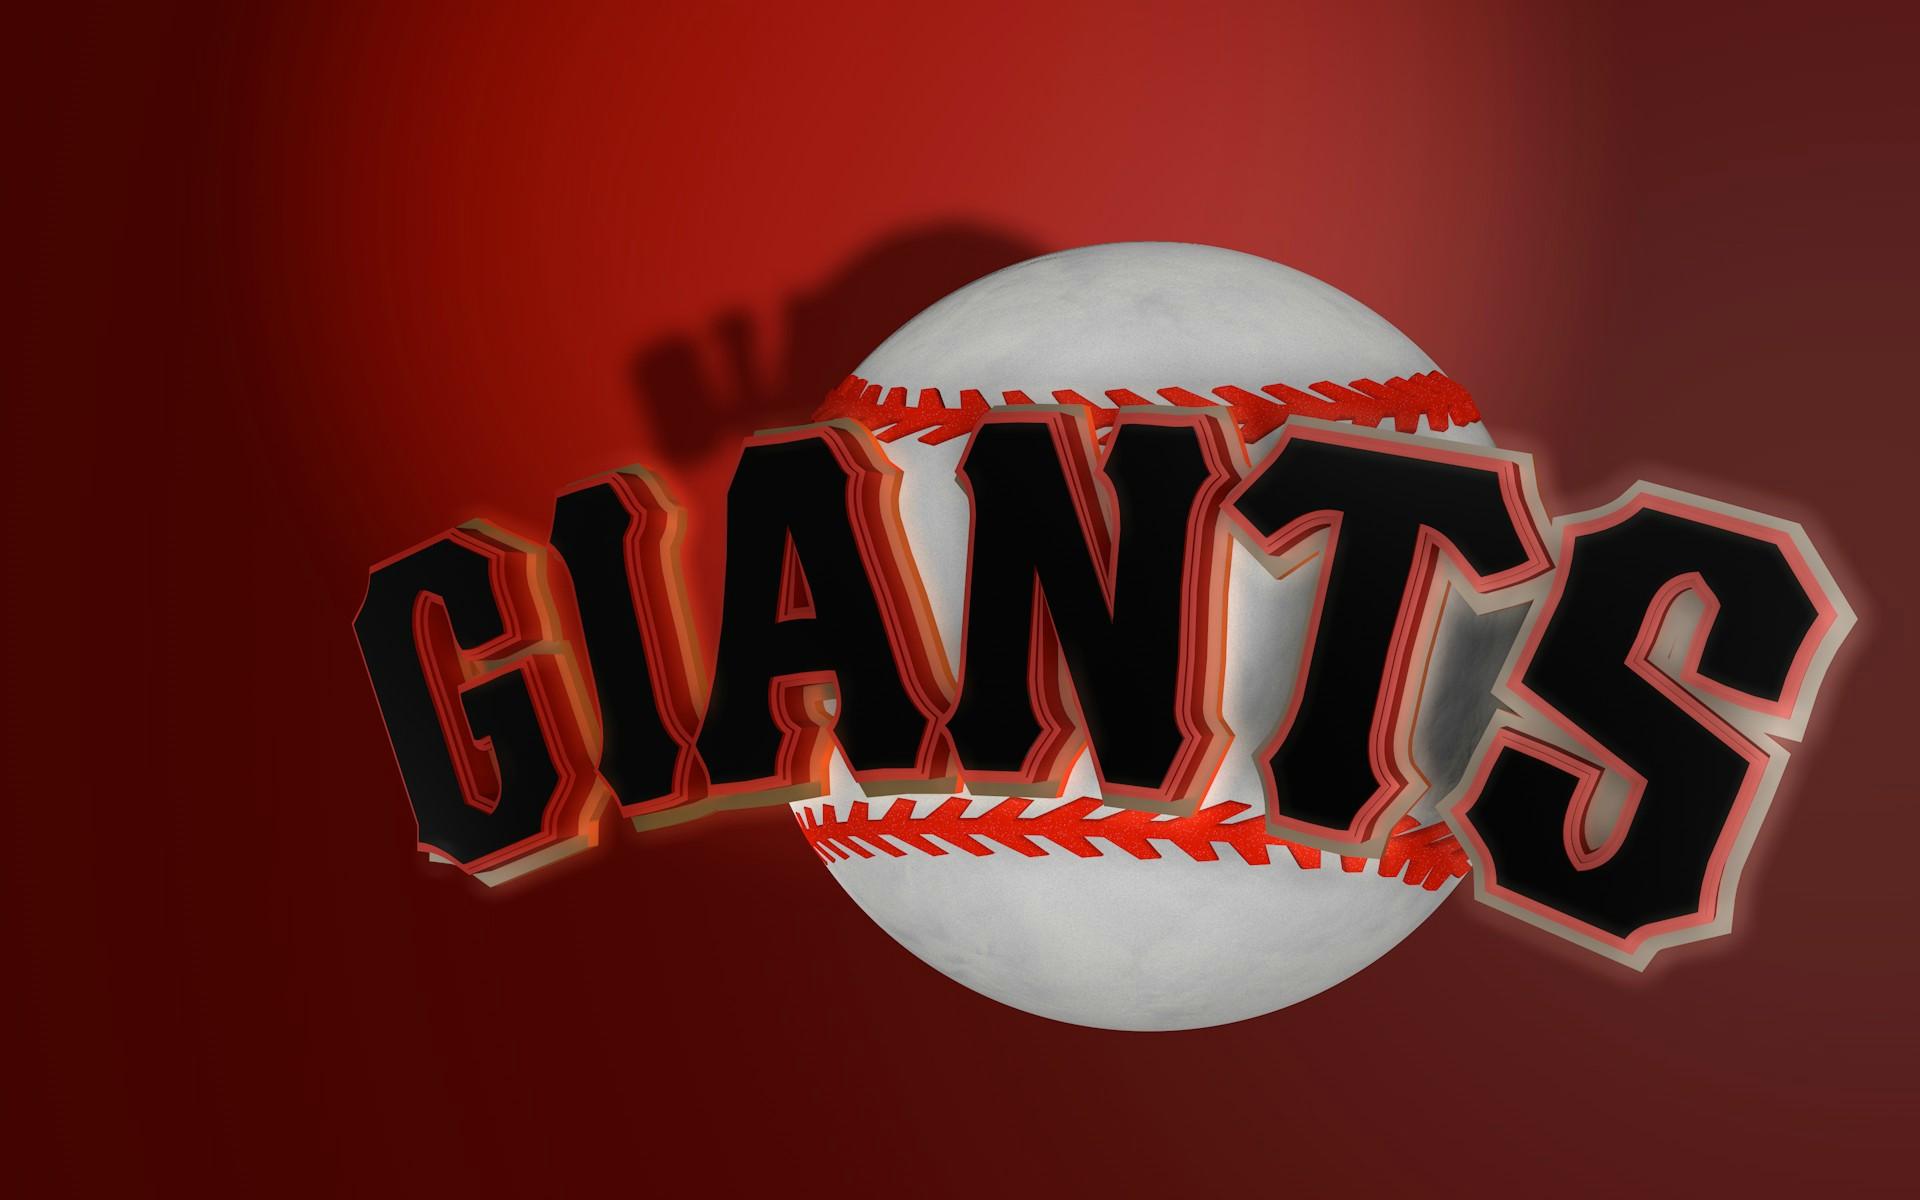 Sf giants backgrounds